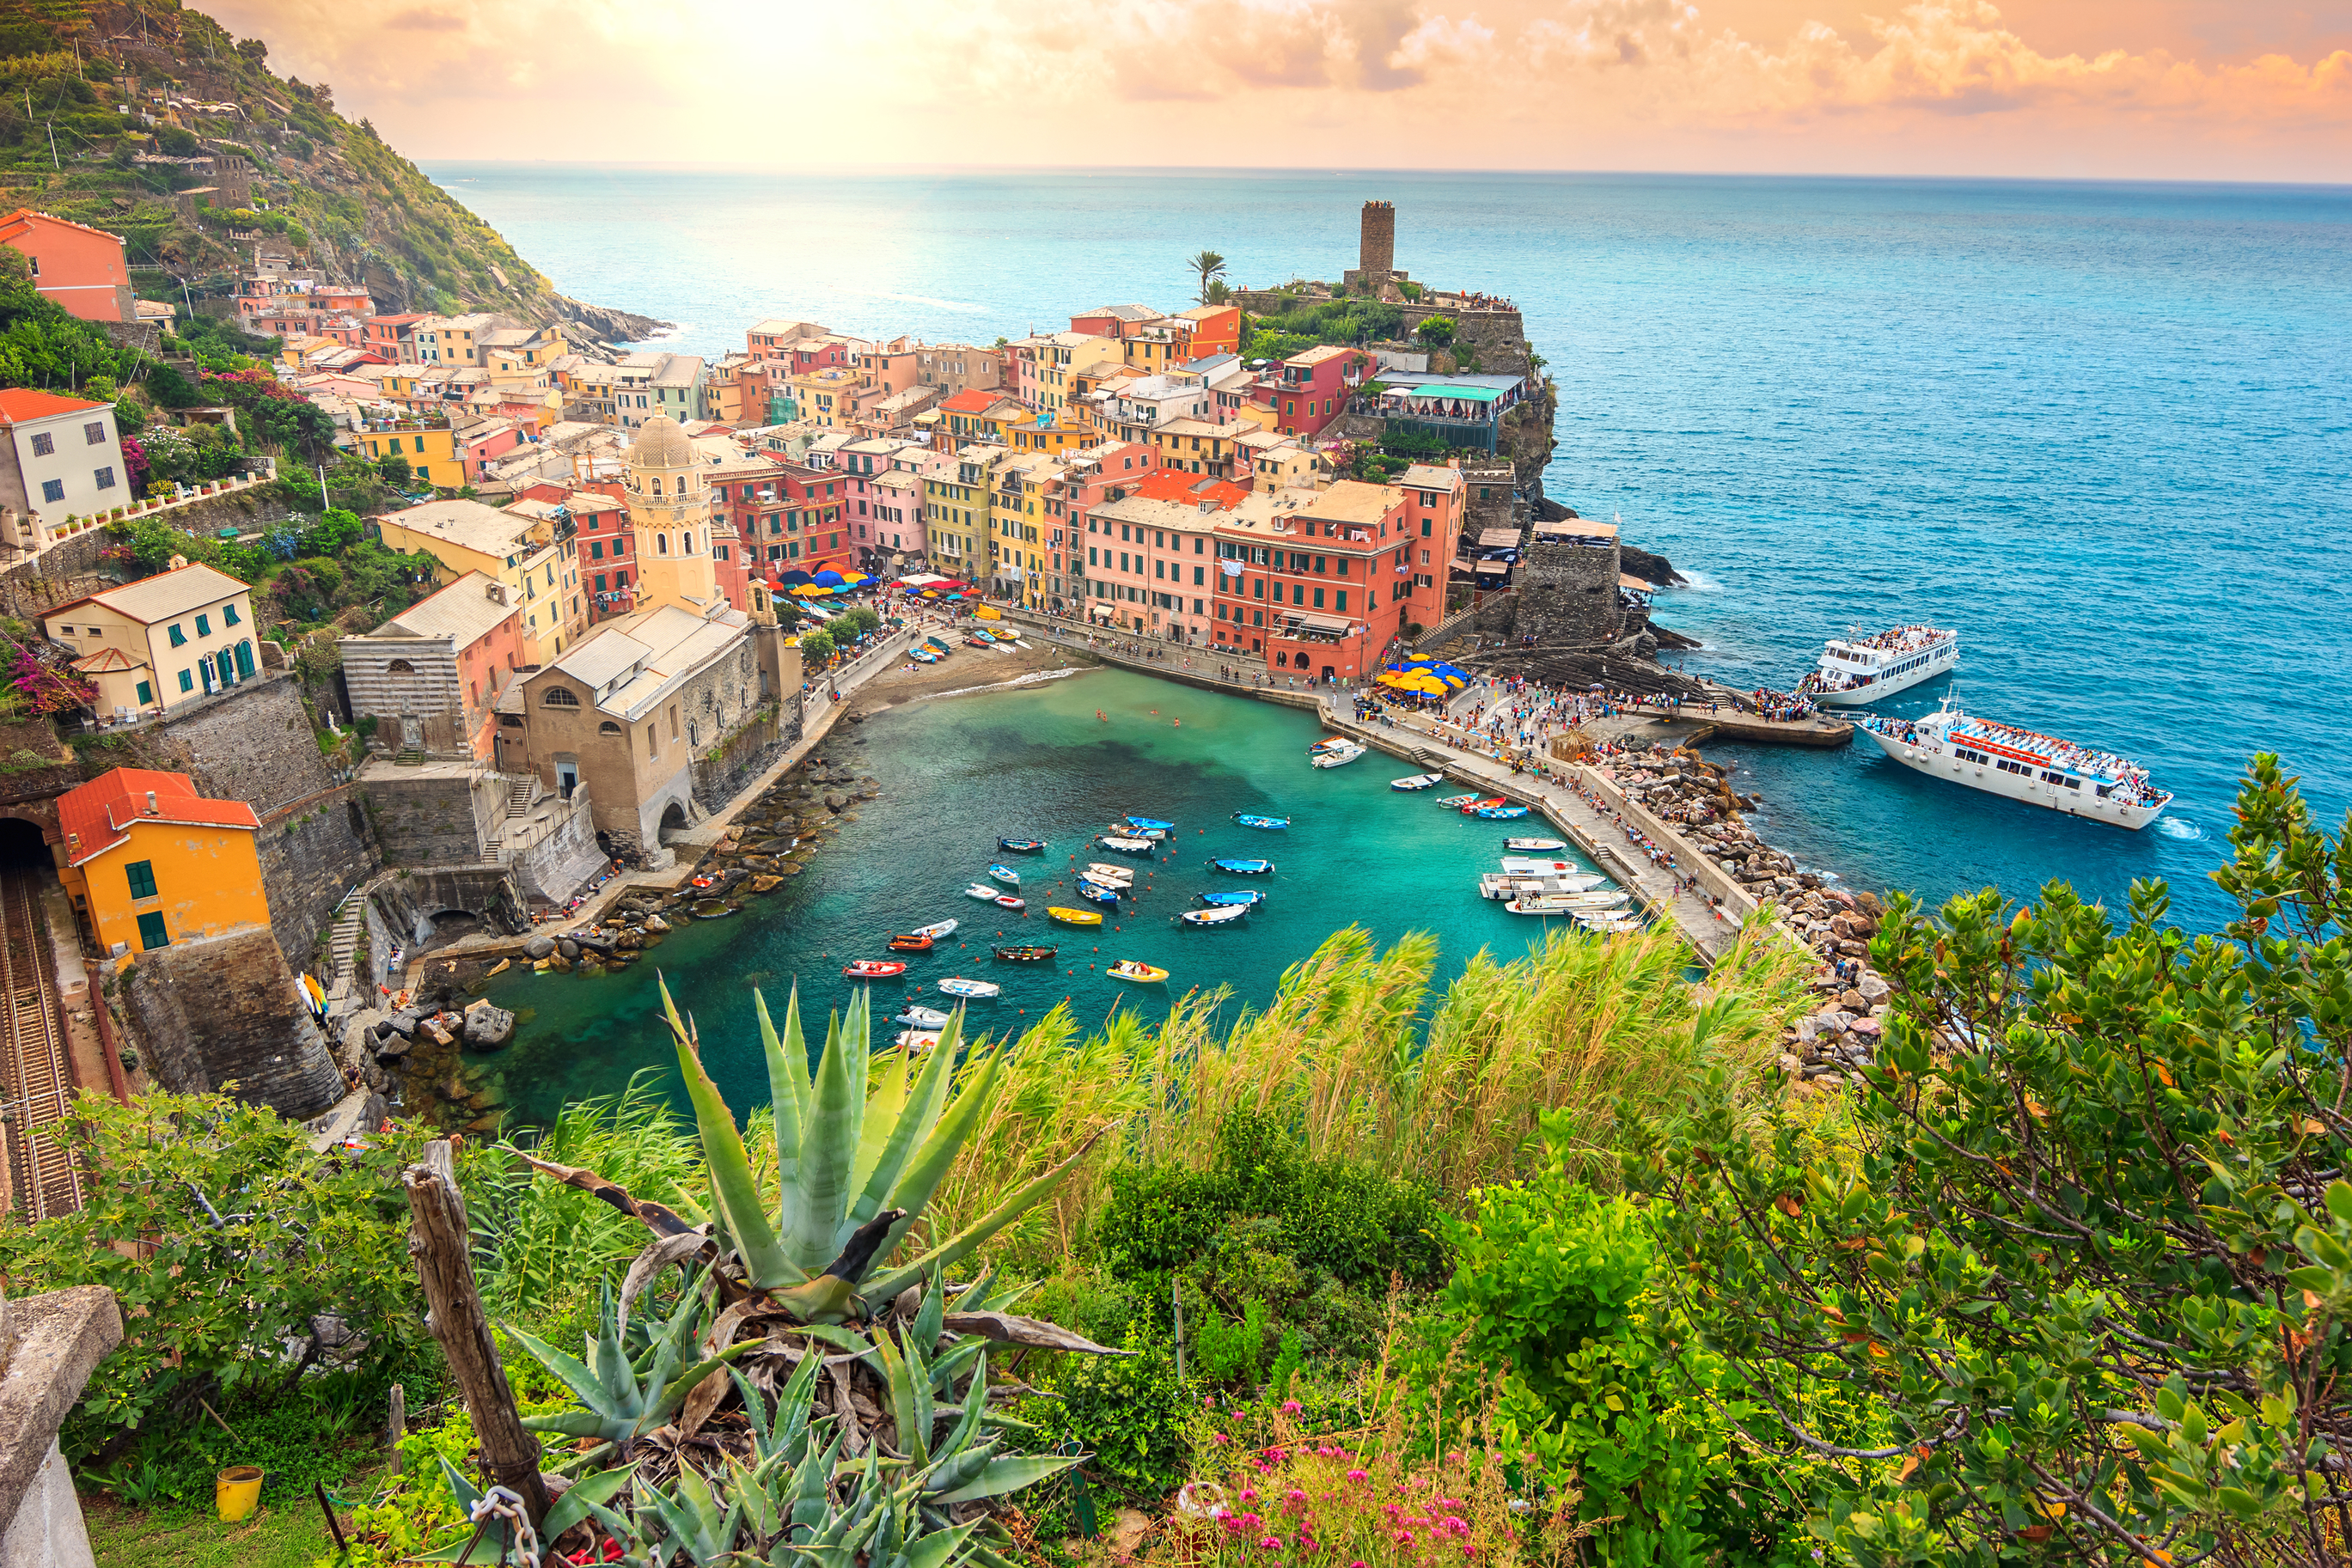 Flights to Europe in the $400s round-trip from dozens of US cities!